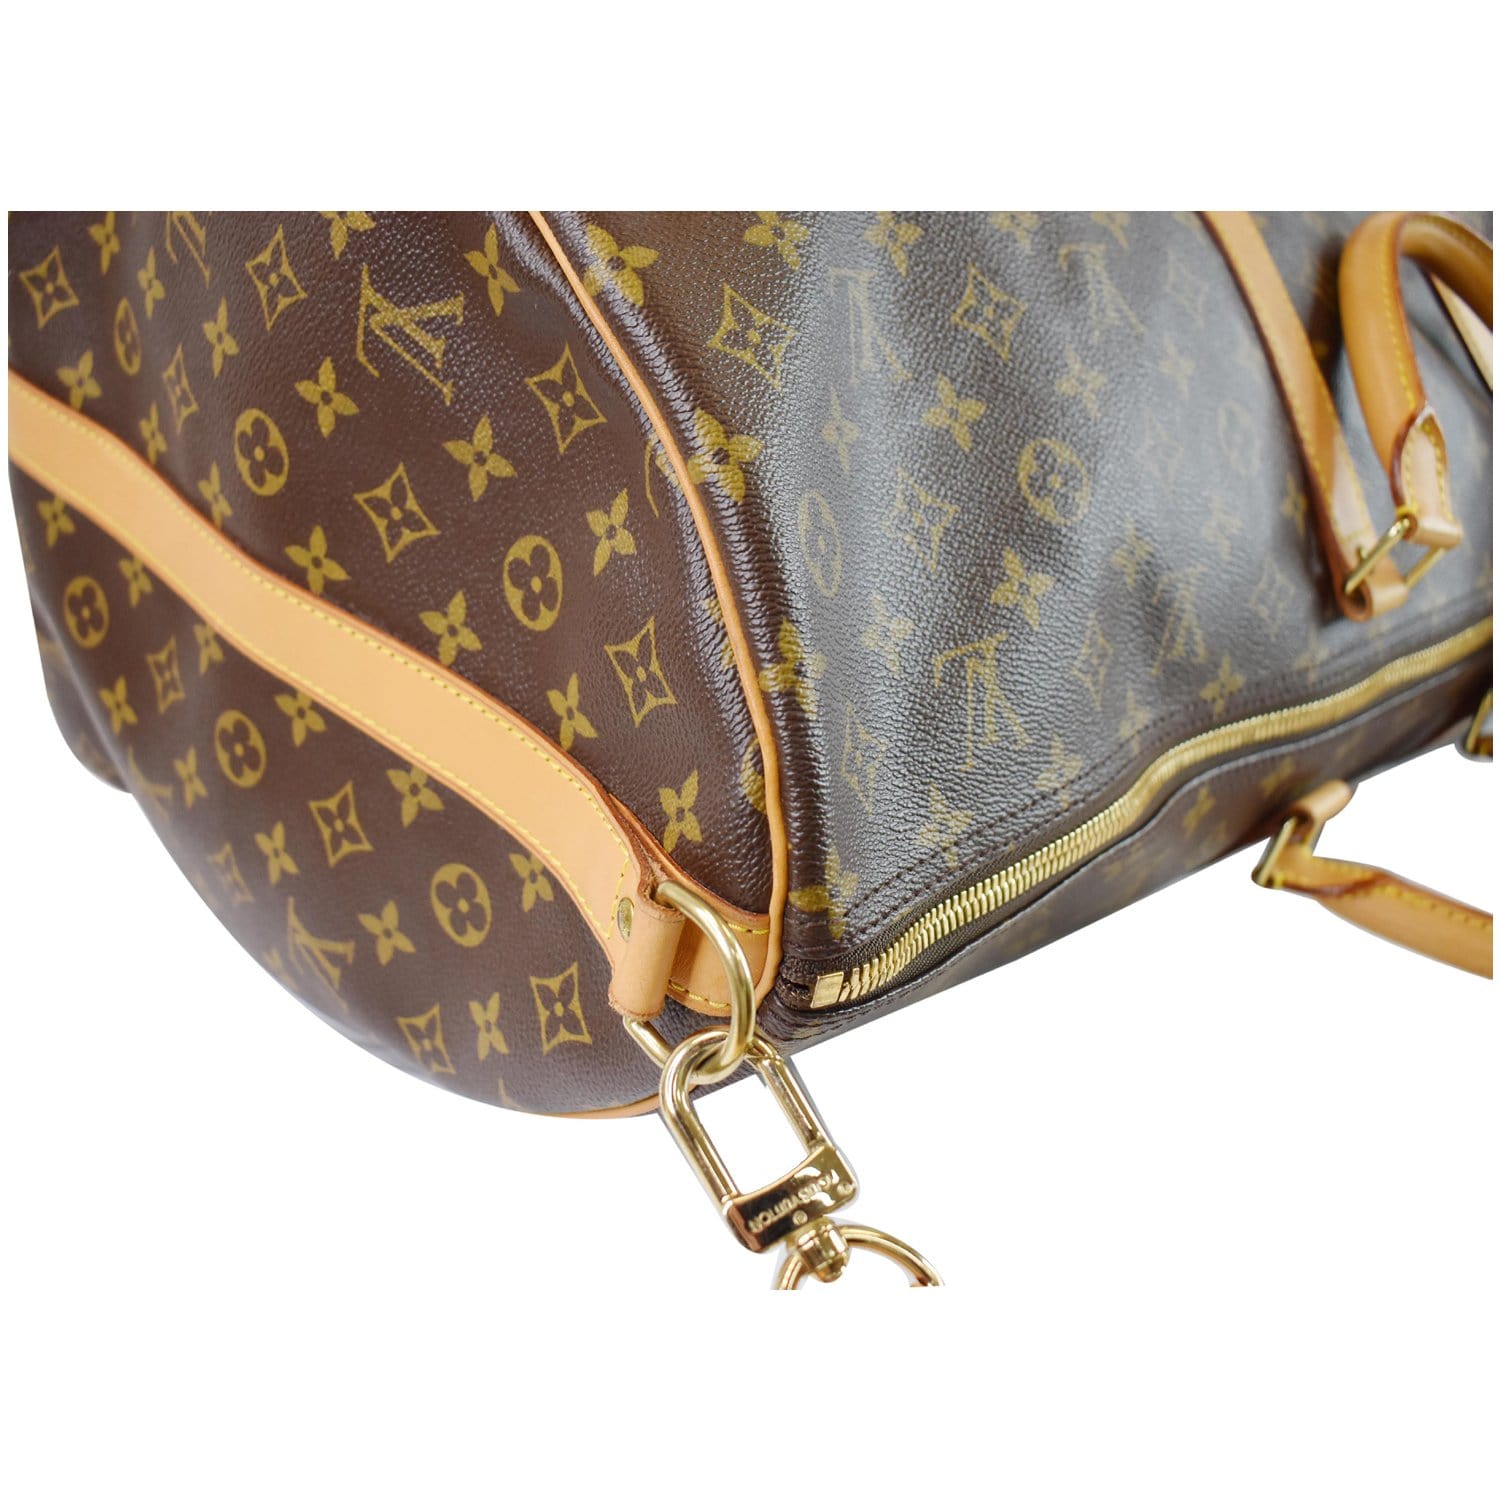 Extra Large Louis Vuitton Bandouliere Monogram Canvas Keepall 60